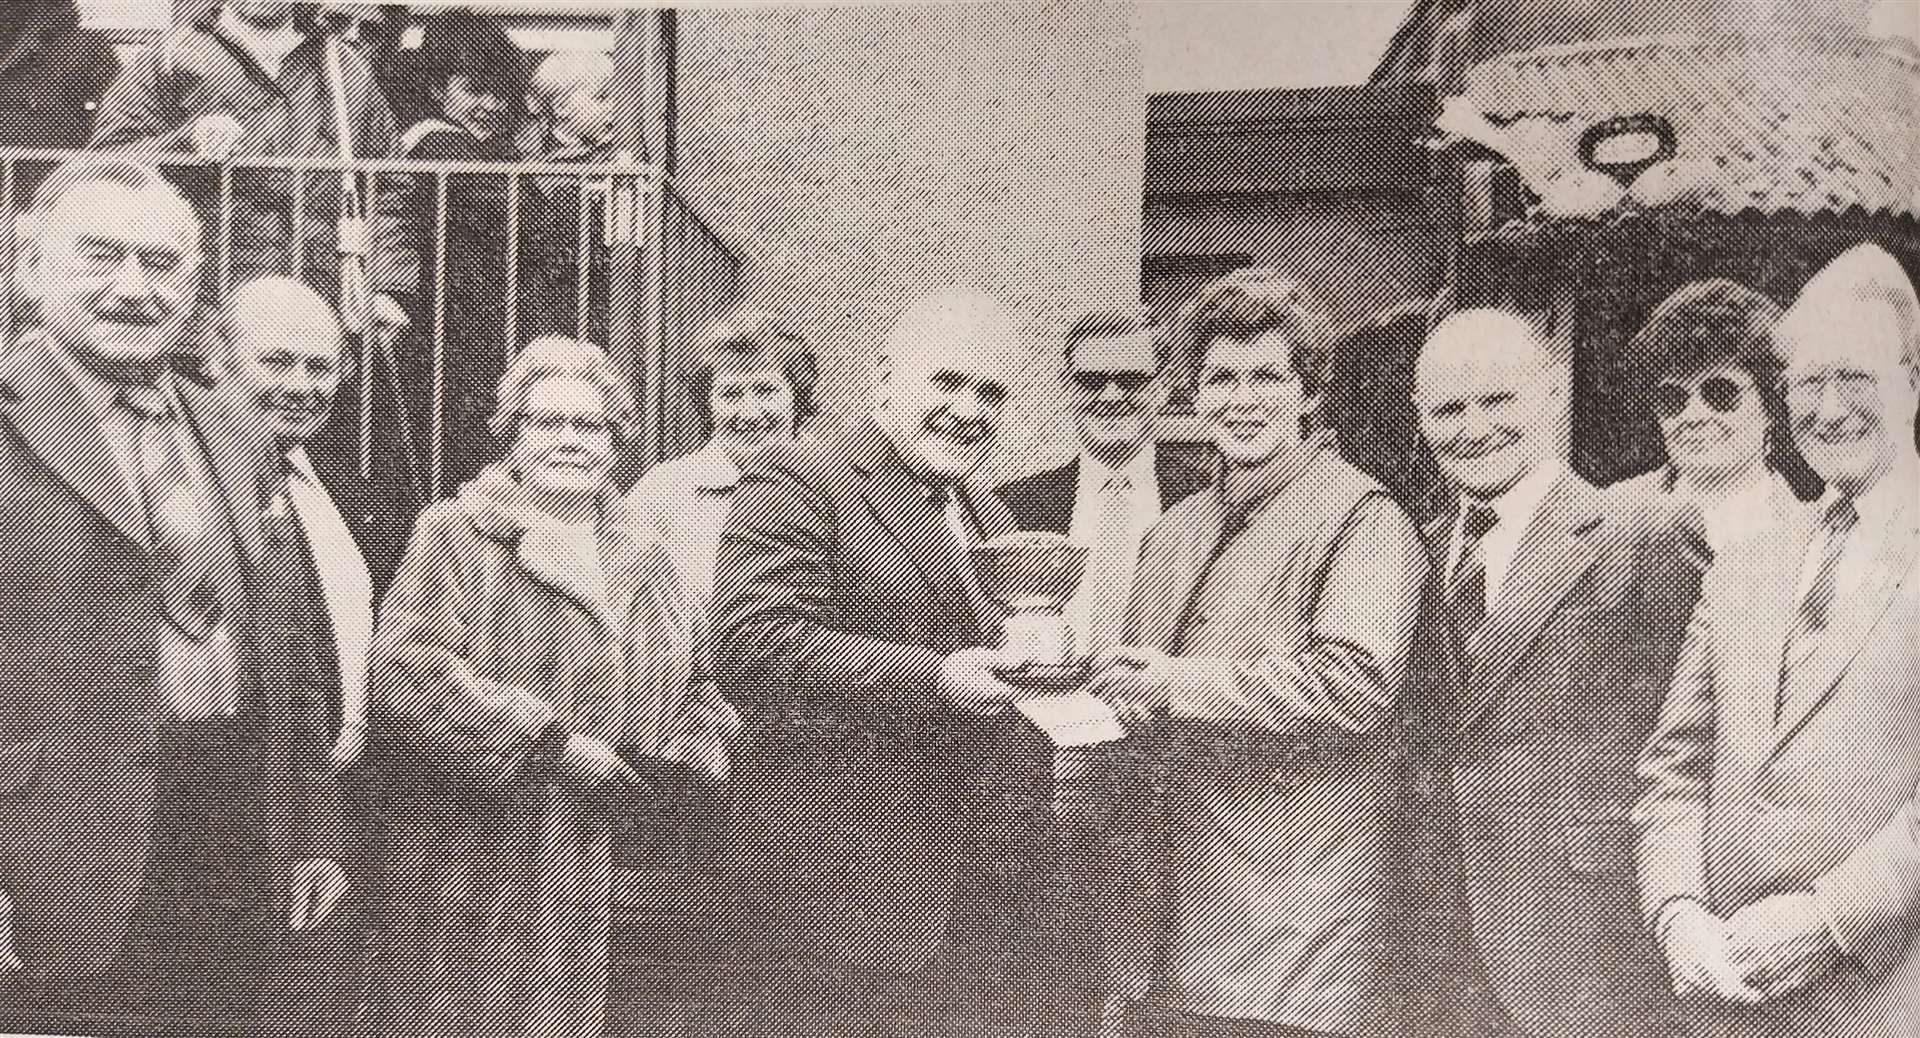 The new building at CE Laing's Nurseries was opened by Beechgrove Garden's Dick Gardiner.(Turriff Advertiser 1985)